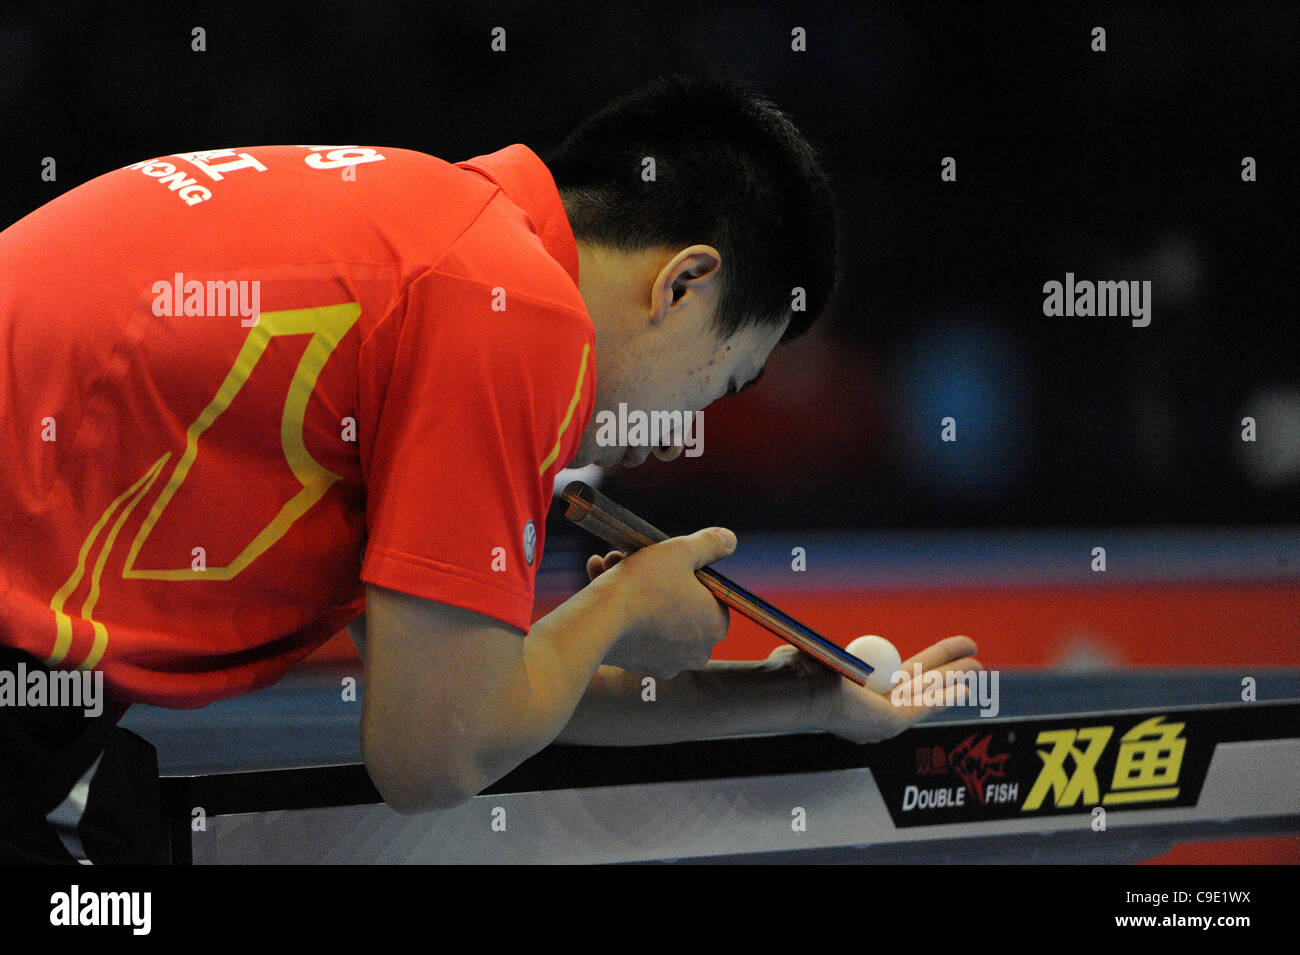 Long MA (CHN) the world #1, competes against  Hao WANG (CHN) the world #2, during the ITTF Table Tennis Tour Grand Finals, ExCel Centre,  London, England November 27, 2011. Long Ma went on to win the tournament beating Zhang Jike in the final. Stock Photo